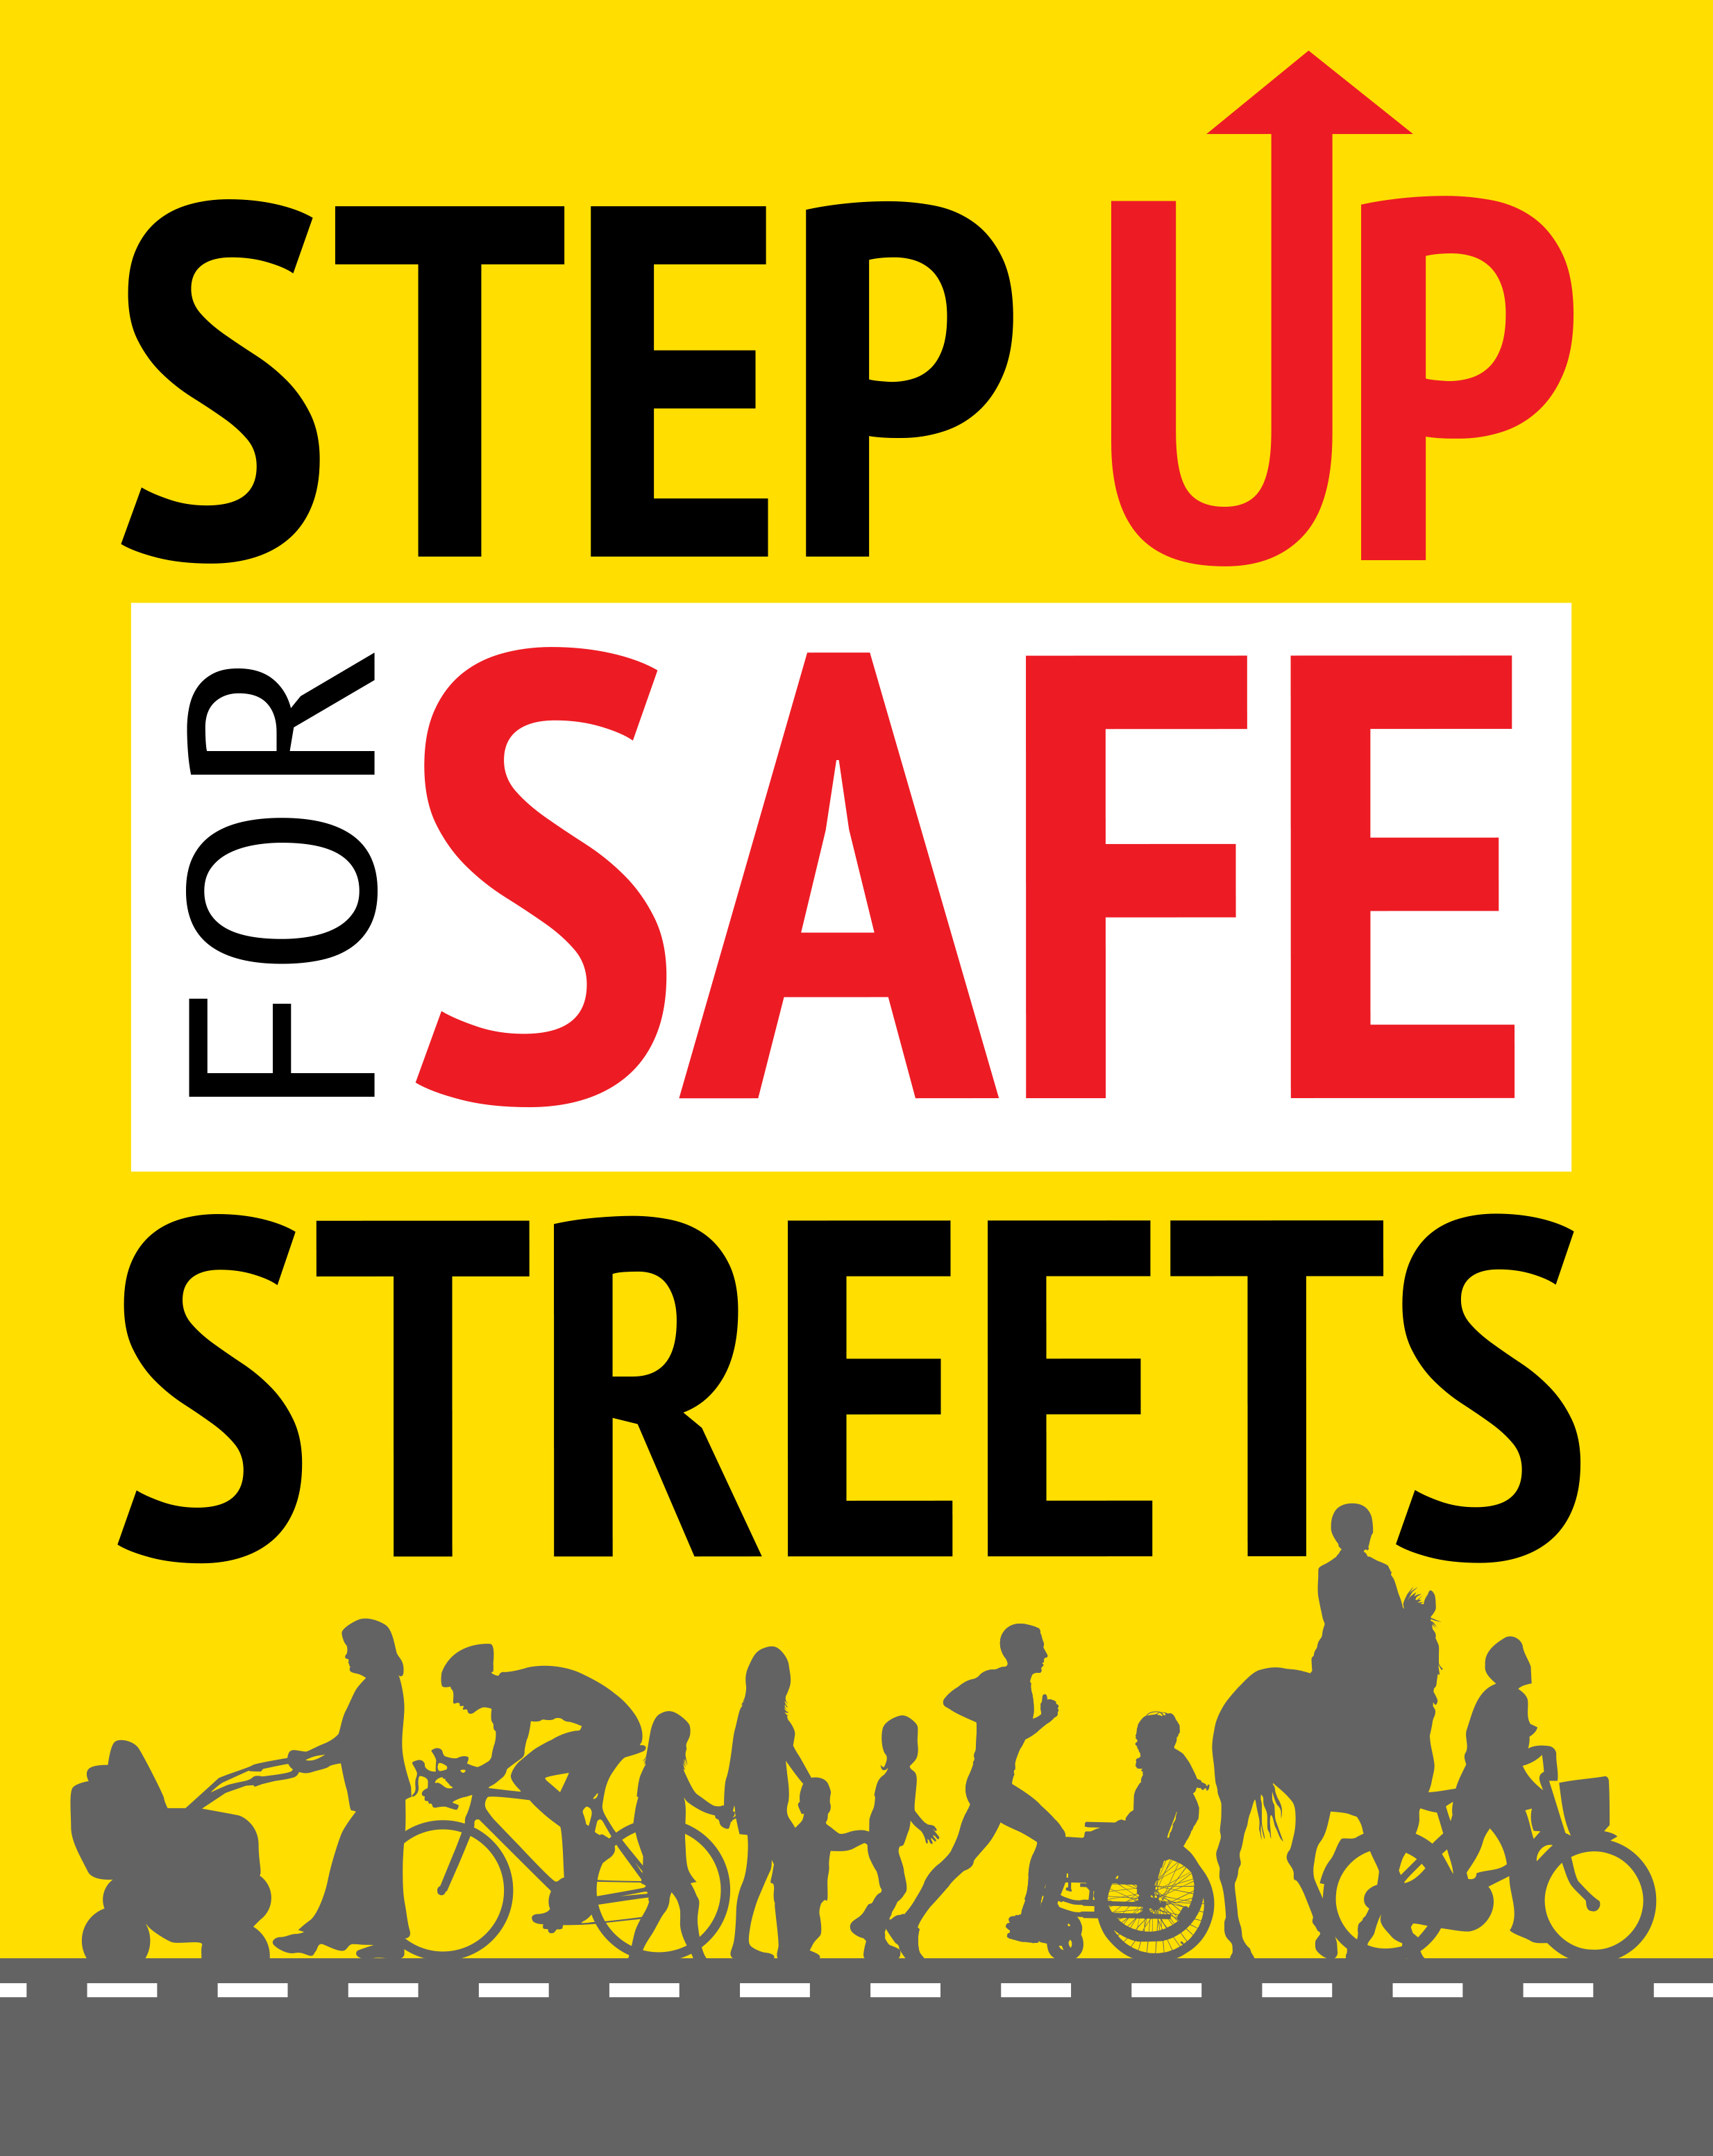 Pendle Community Safety Partnership urges drivers to Step up for safe streets 